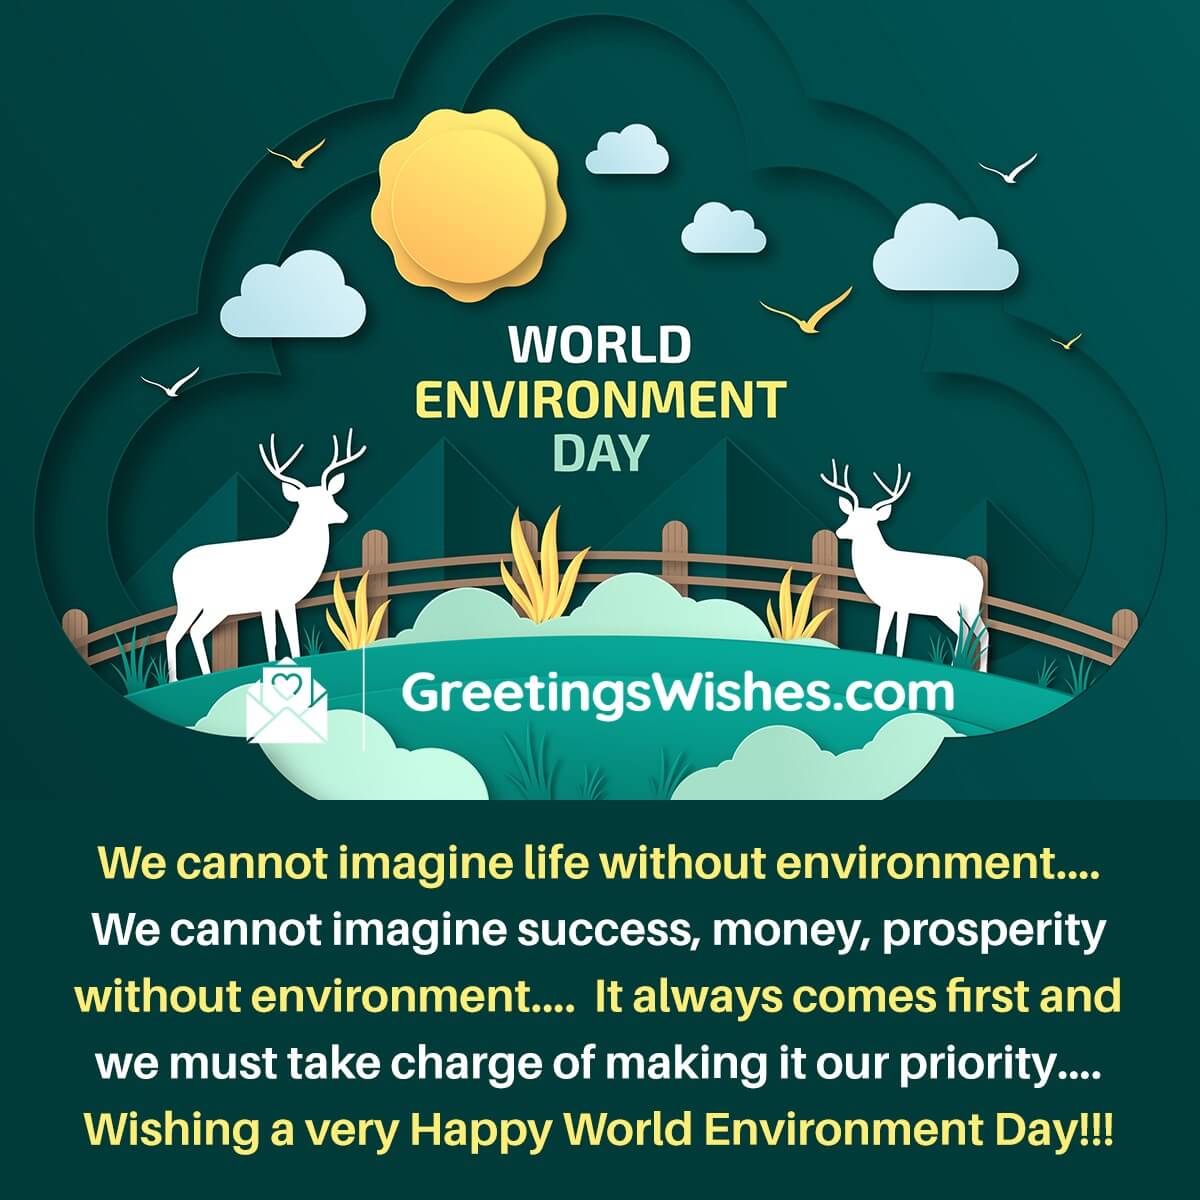 World Environment Day Message Image